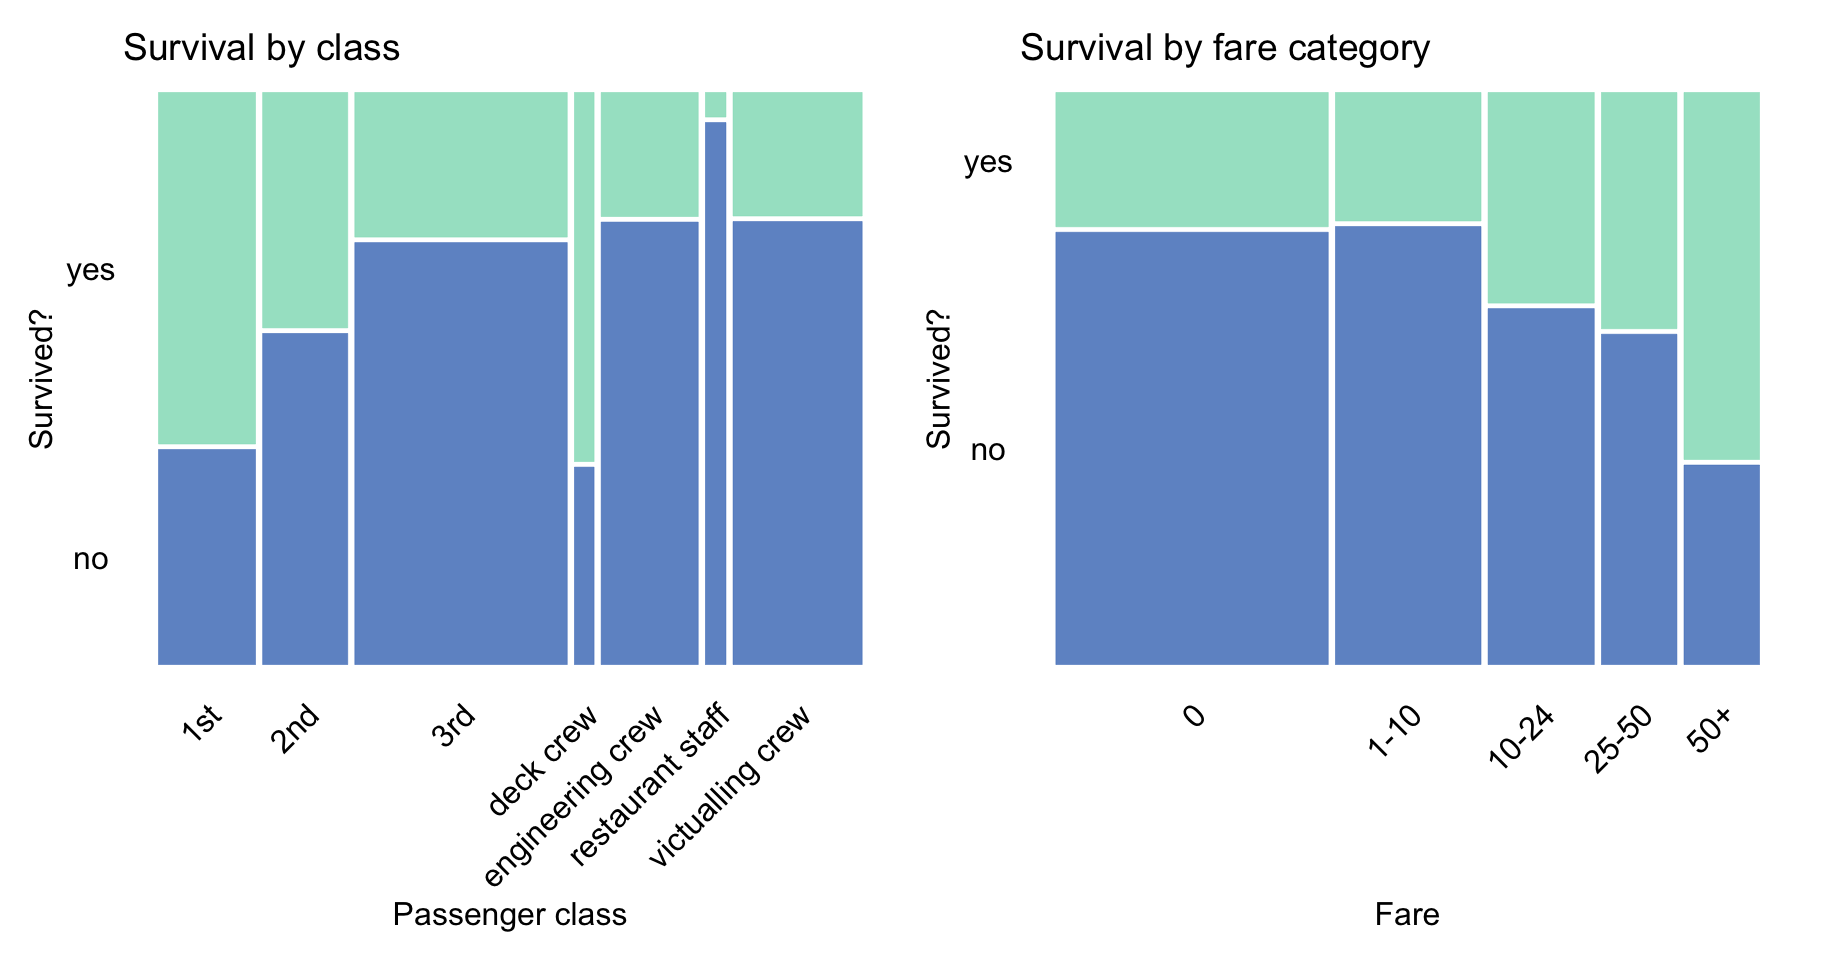 Survival according to travel-class and ticket-fare in the Titanic data.